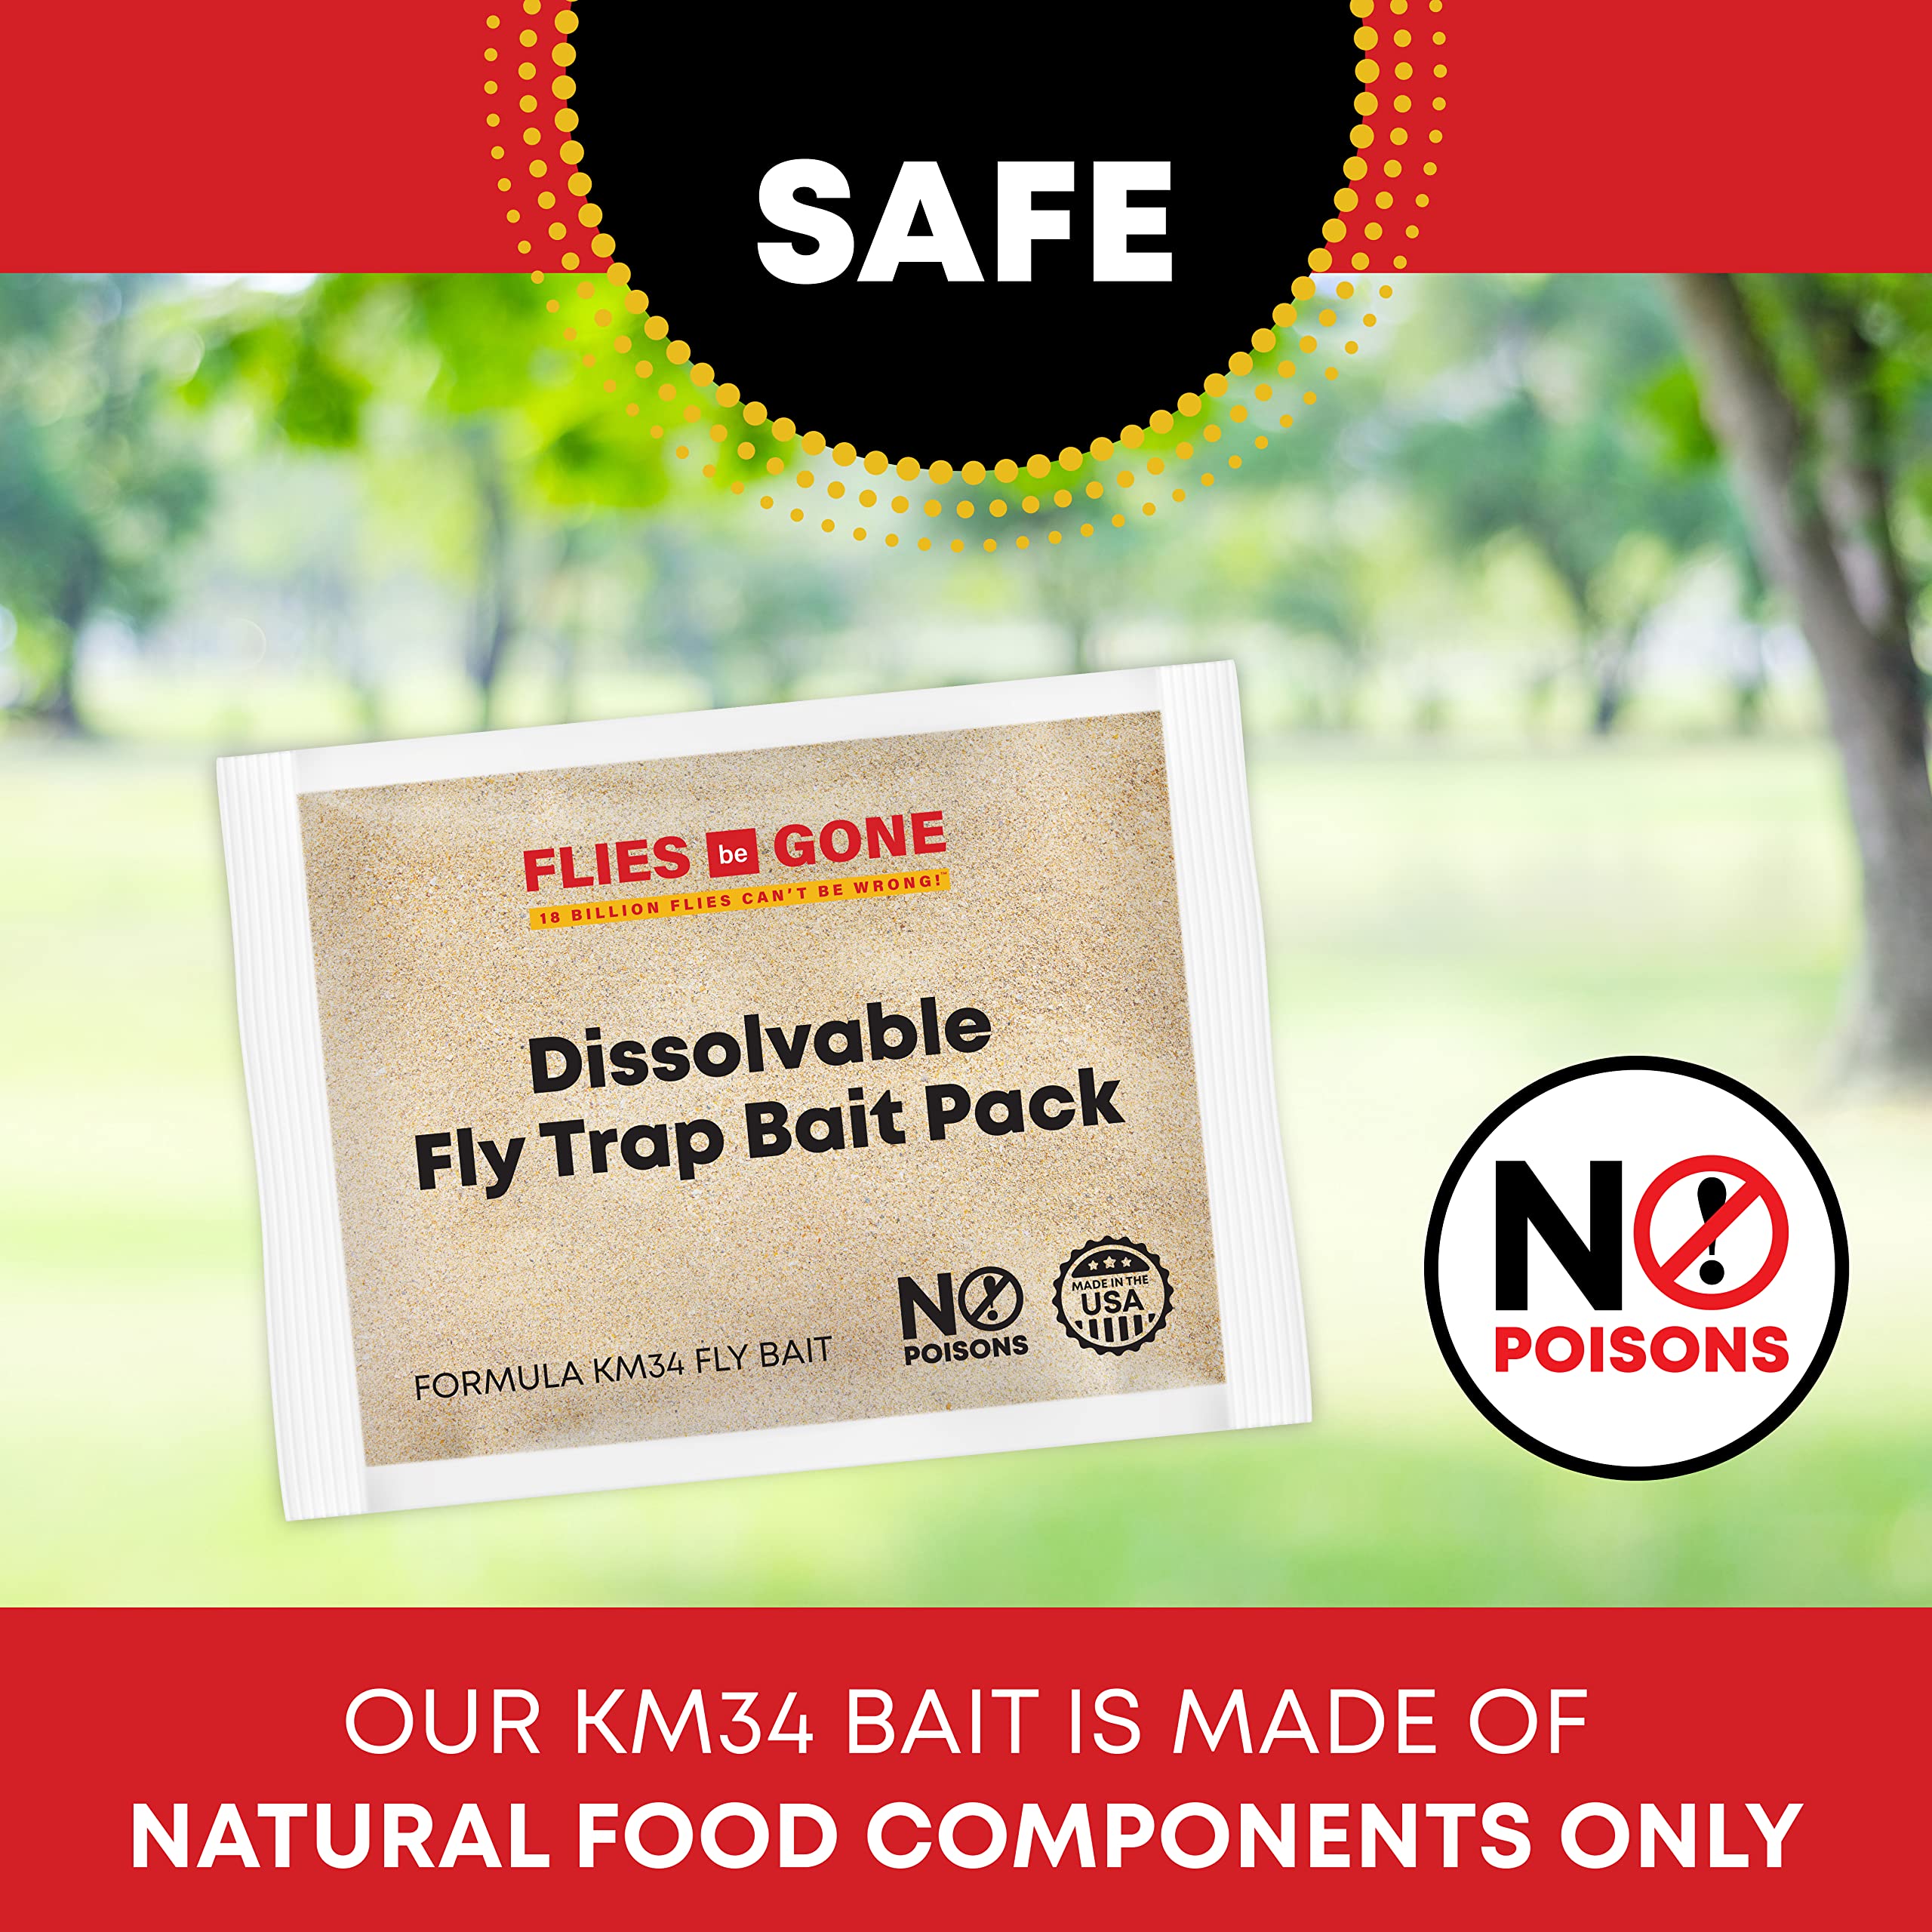 Flies Be Gone Outdoor Fly Traps 2-Pack Reusable – with 2 Dissolvable Fly Attractant Refill Packets & 2 Suspension Strap - Best Non-Toxic Fly Catcher for Your patios, Home and Commercial Use